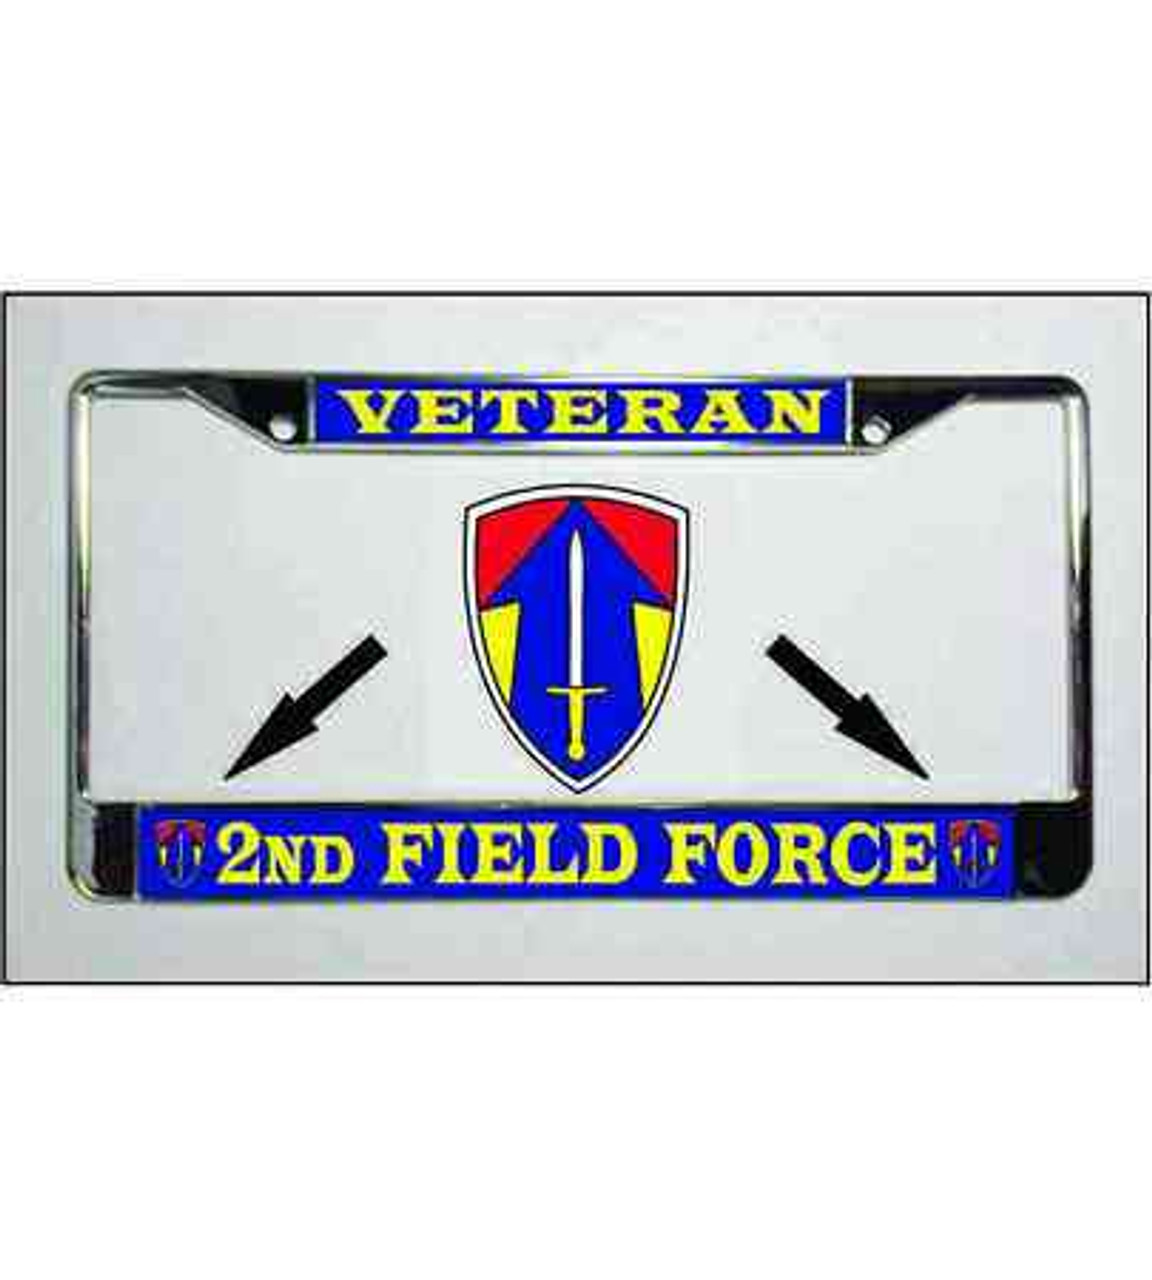 army 2nd field force veteran license plate frame